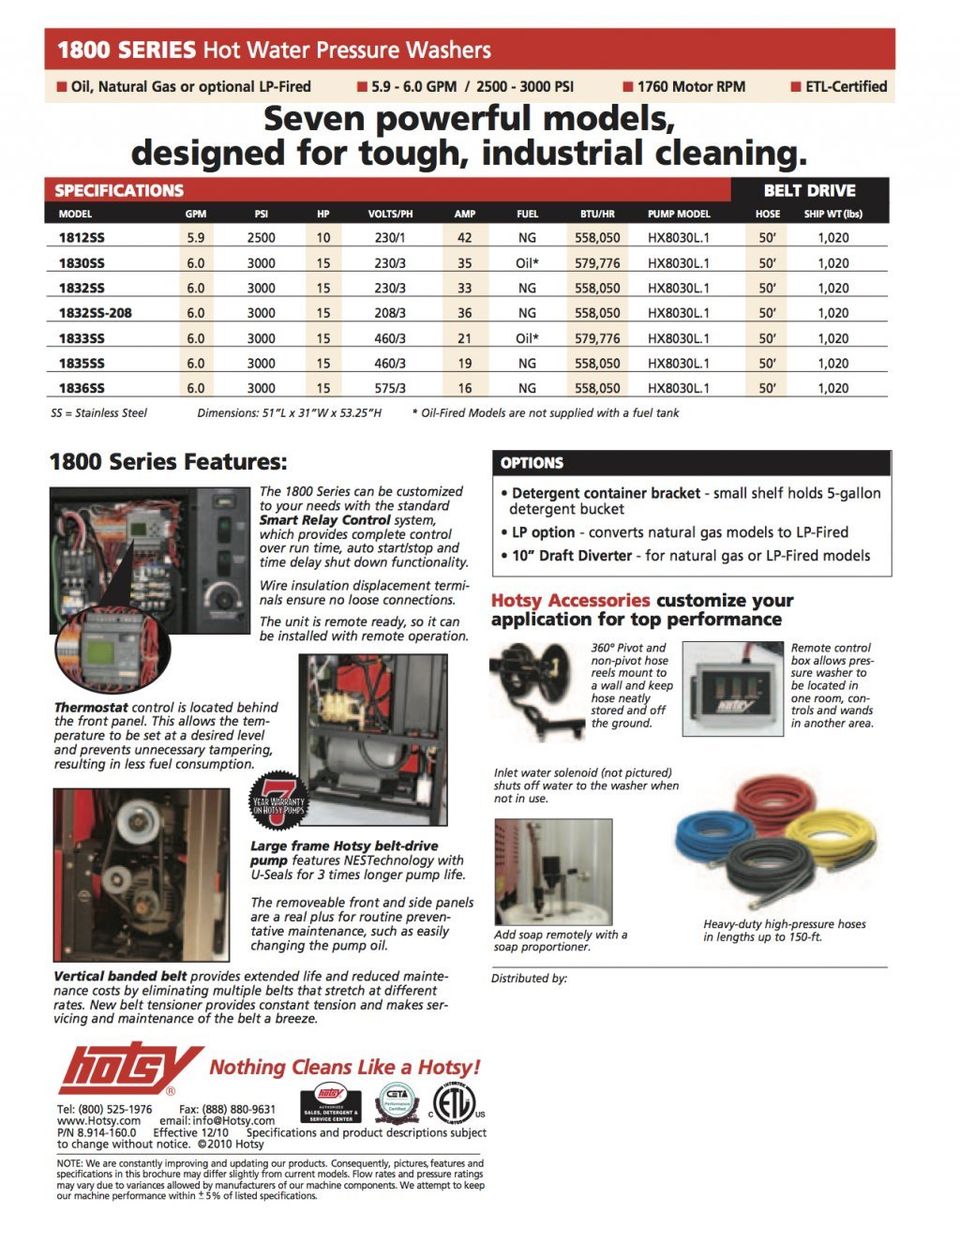 Hotsy Hot Water Pressure Washer 1800 Series Product Sheet -- Page 2